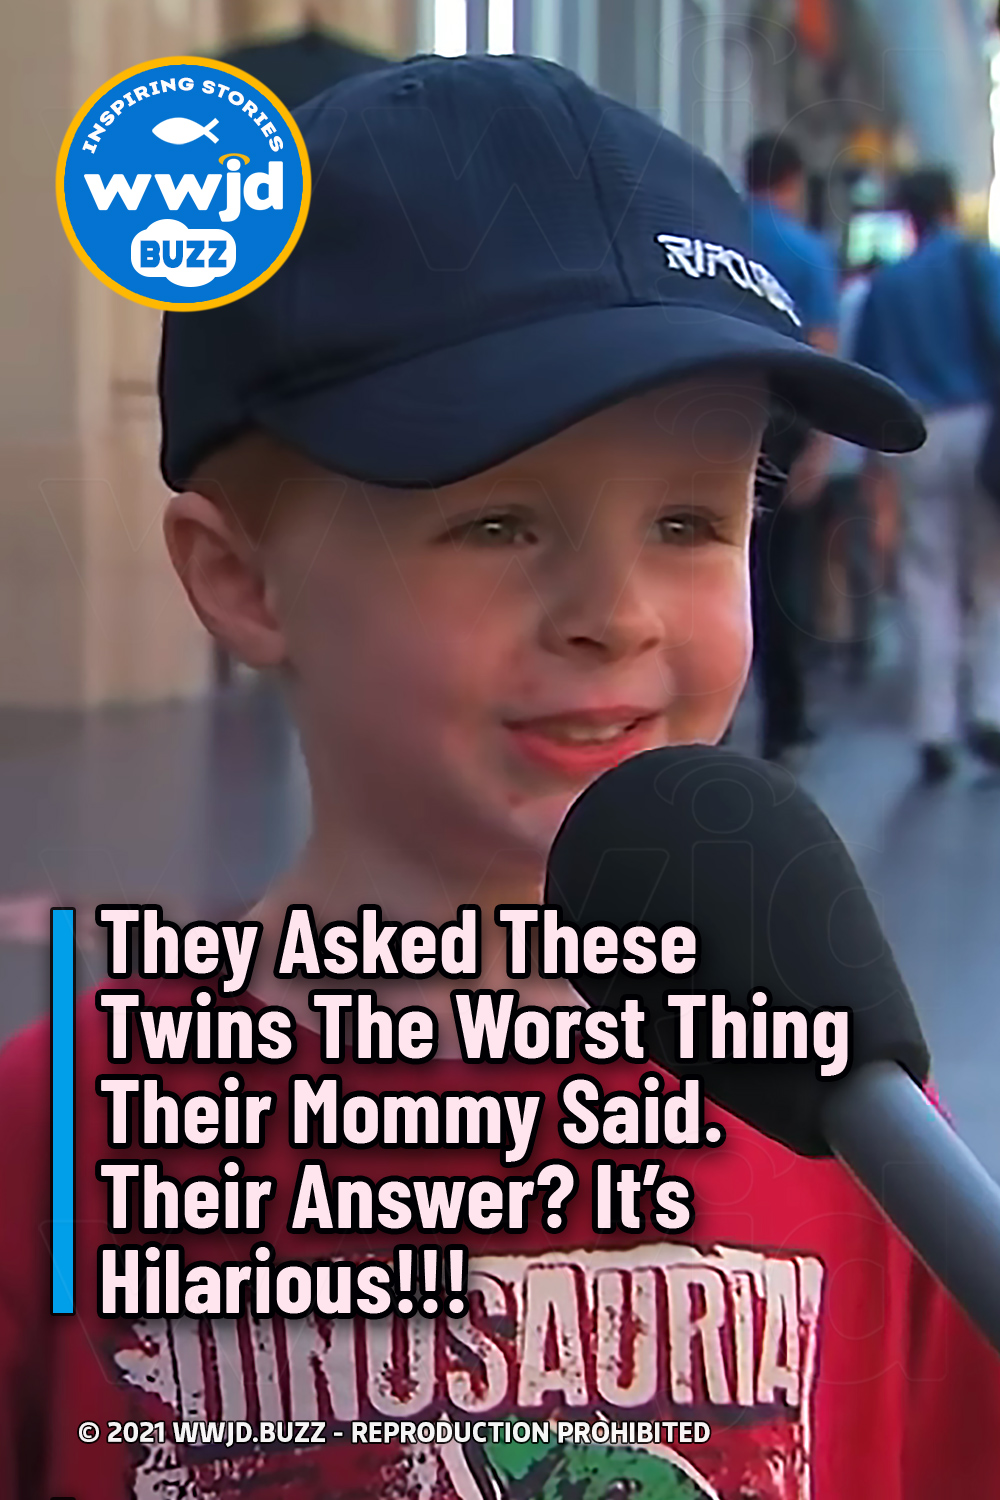 They Asked These Twins The Worst Thing Their Mommy Said. Their Answer? It\'s Hilarious!!!